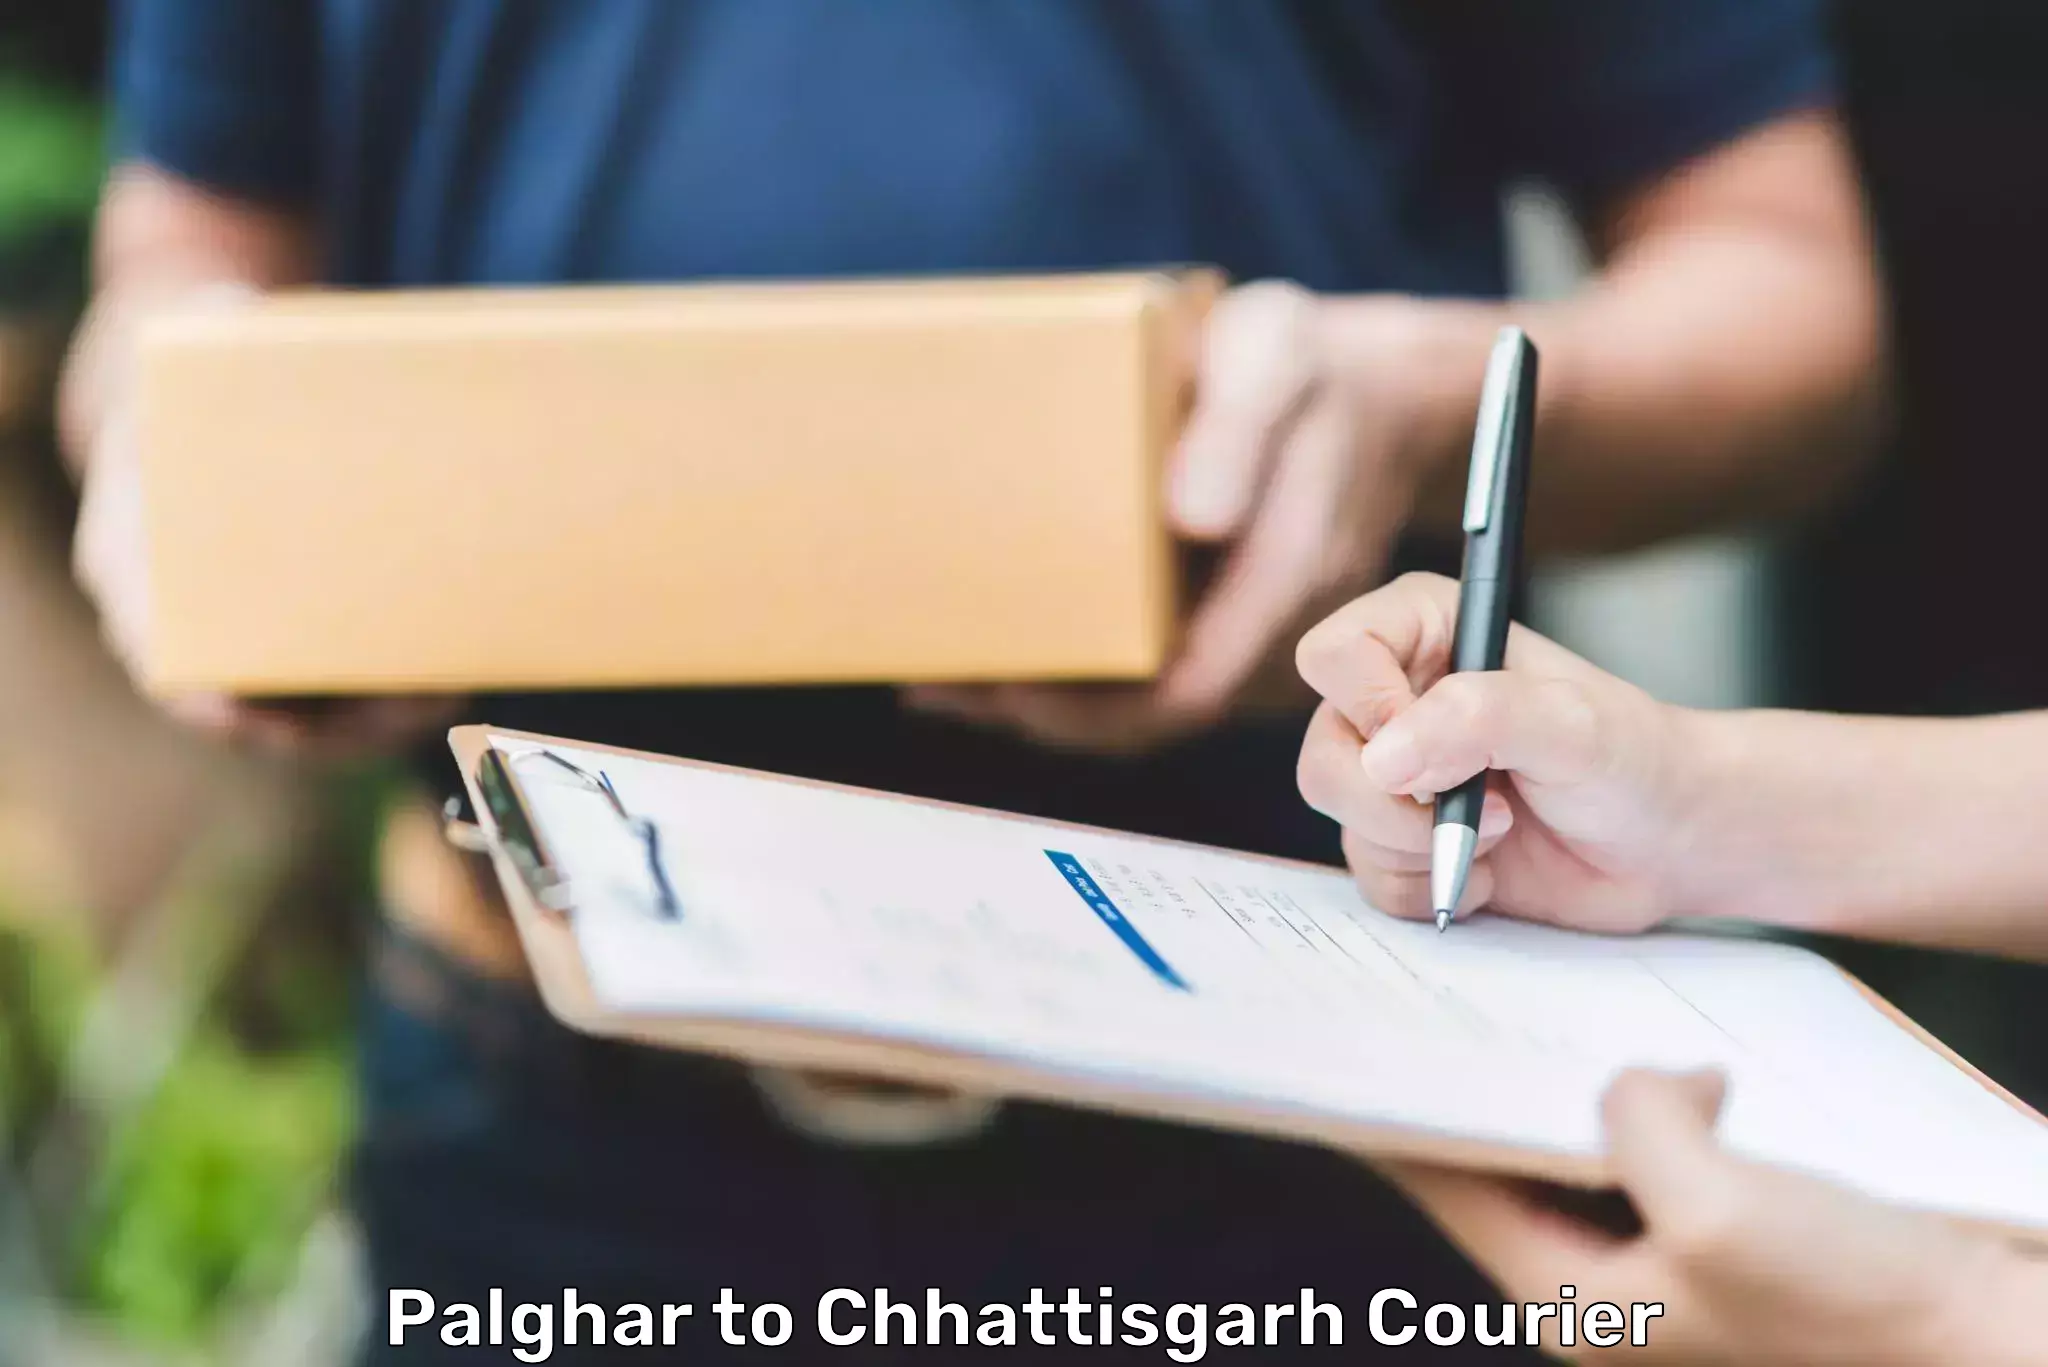 Courier service innovation Palghar to Dongargarh